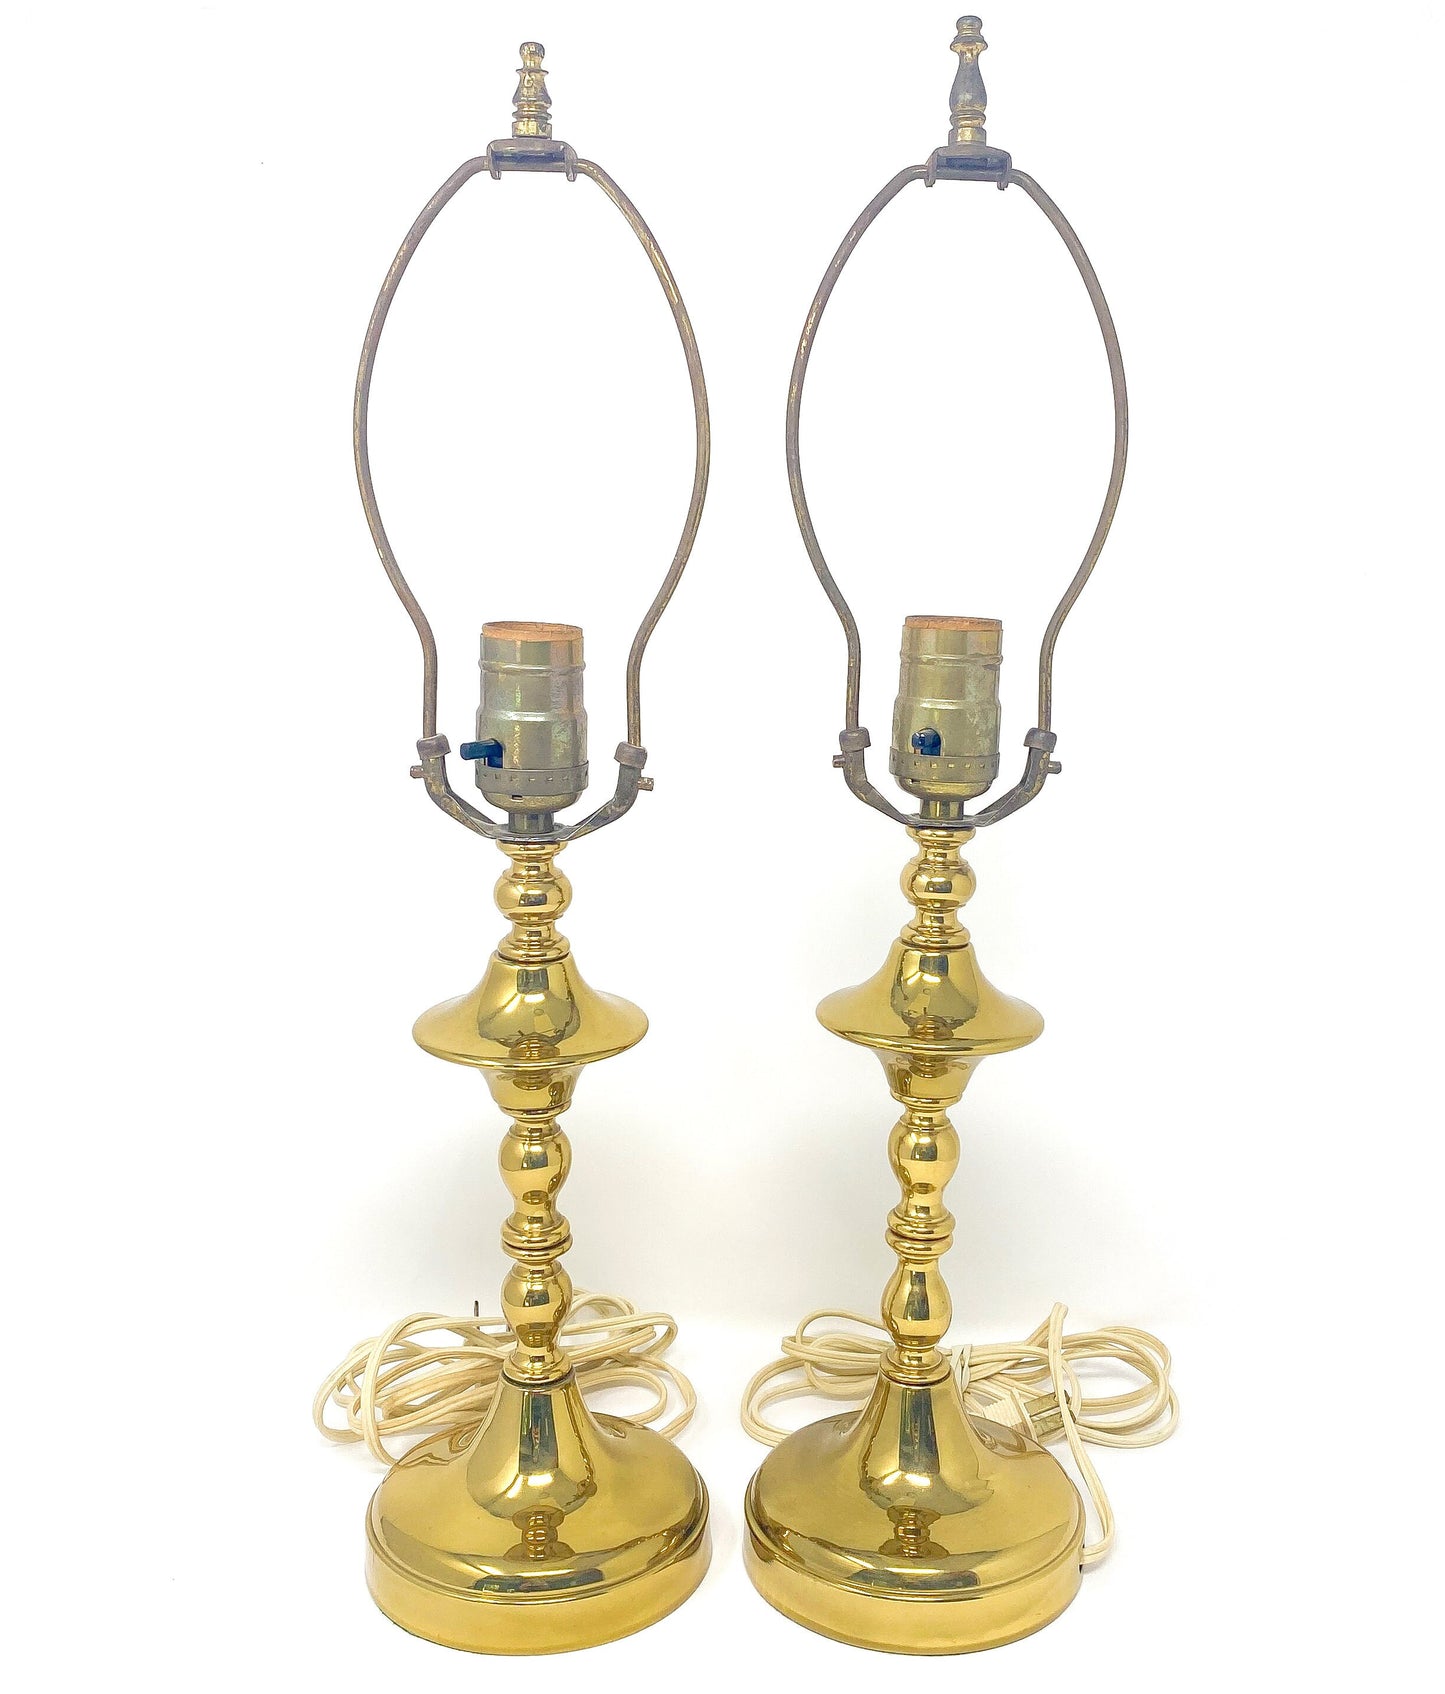 Pair of Vintage Brass Candlestick Table Lamps